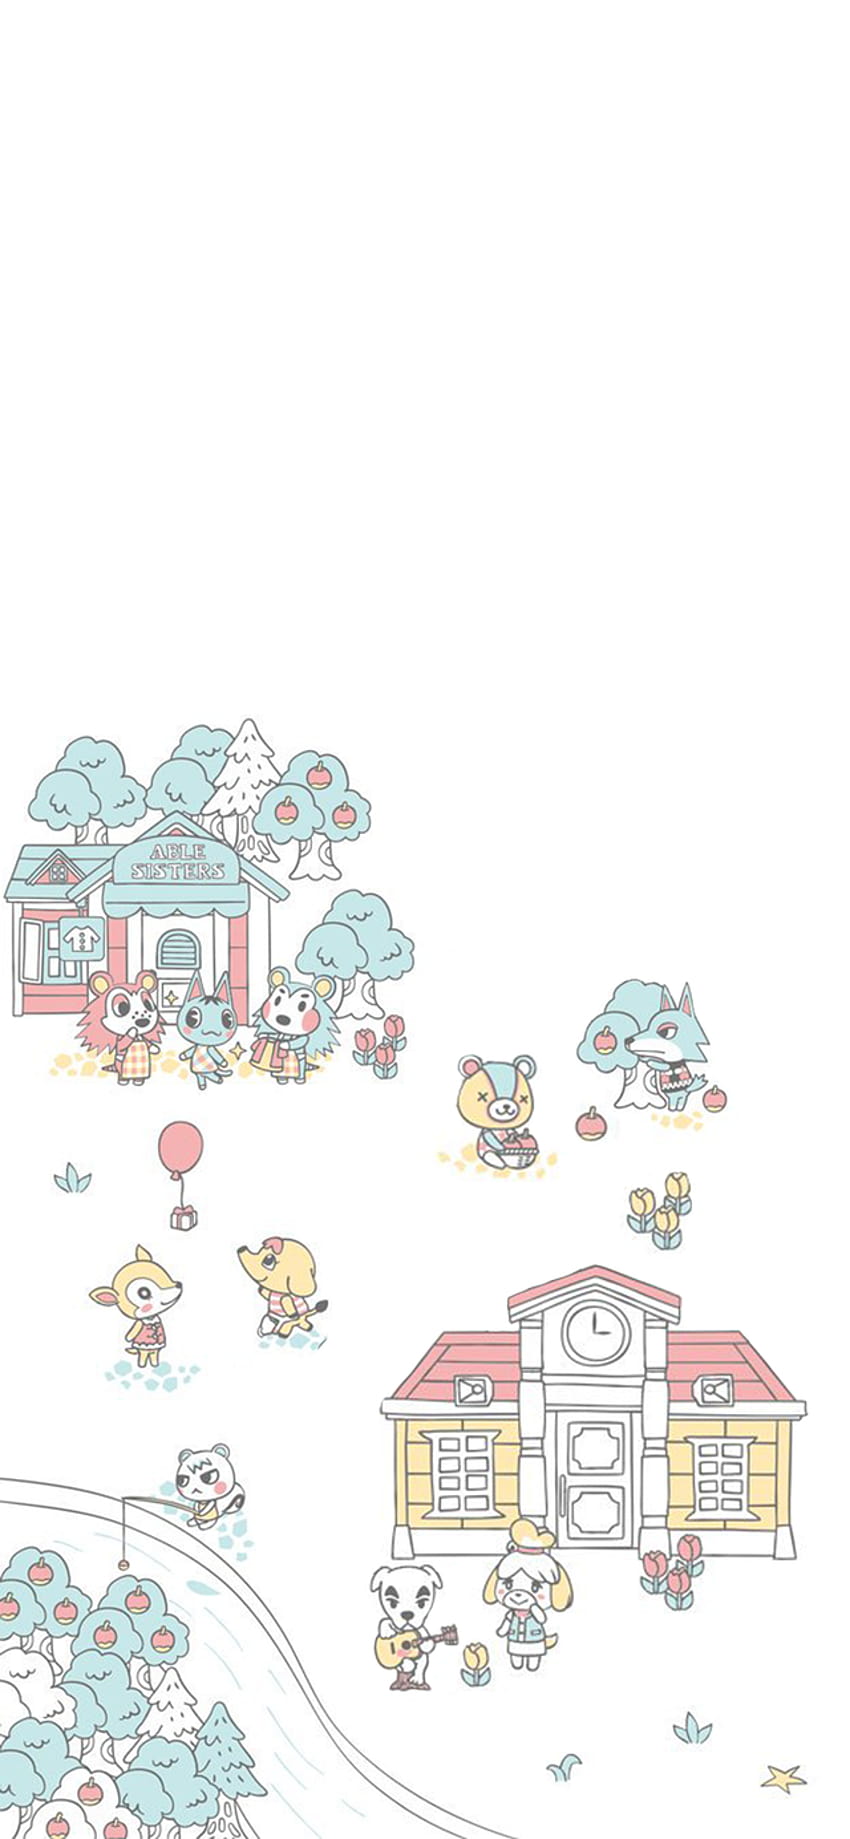 A cartoon drawing of a school with animals gathered around it - Animal Crossing